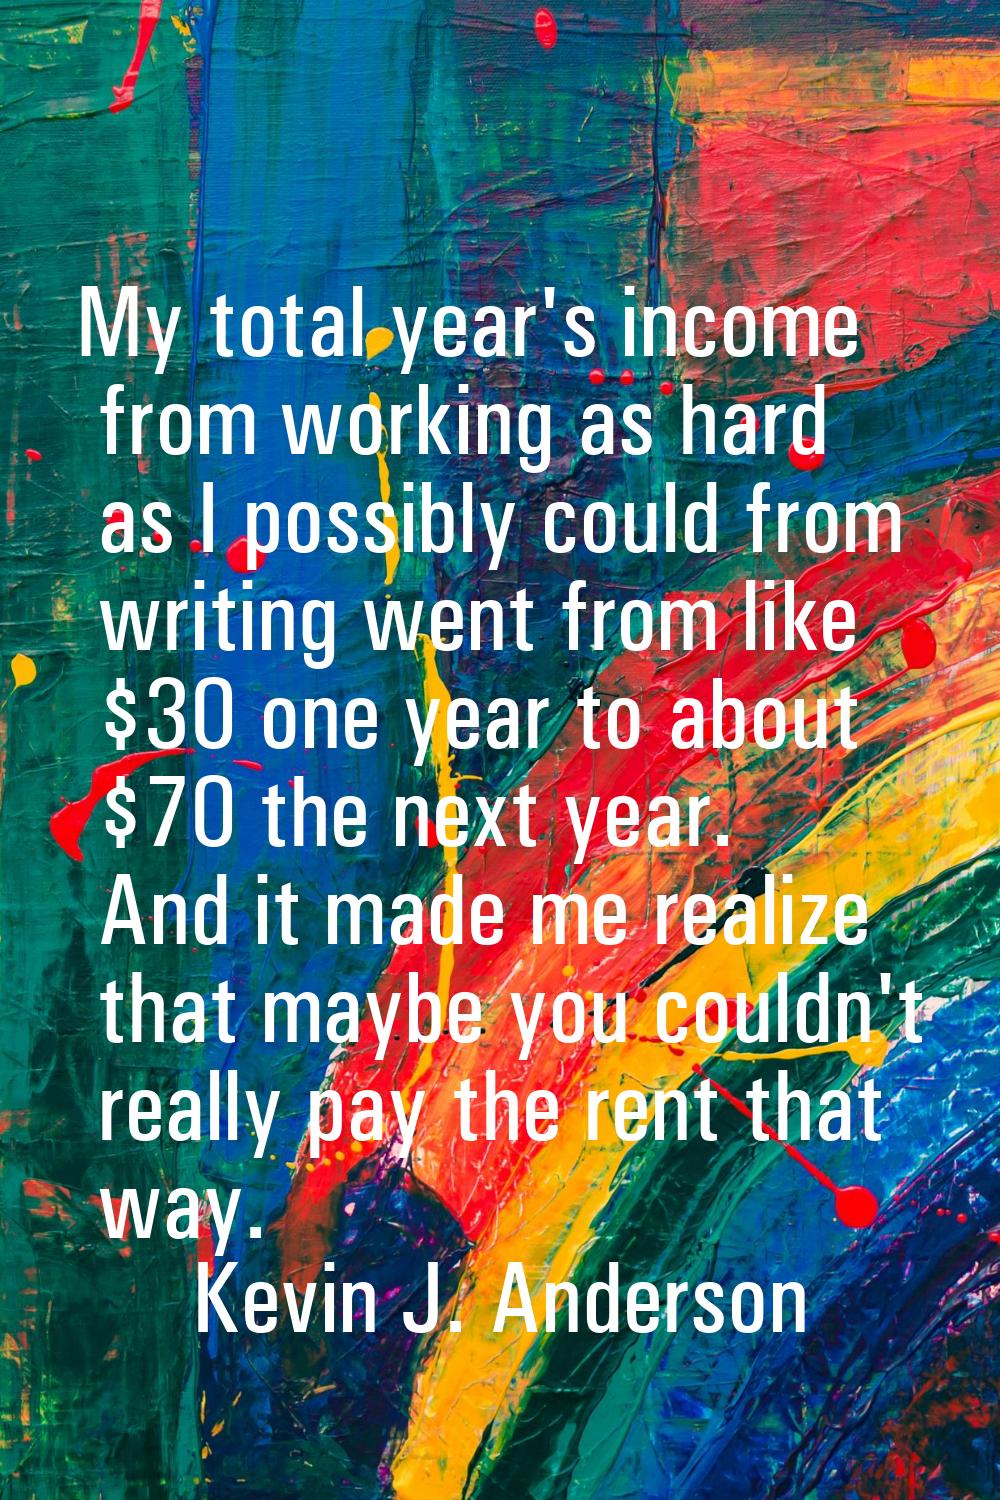 My total year's income from working as hard as I possibly could from writing went from like $30 one